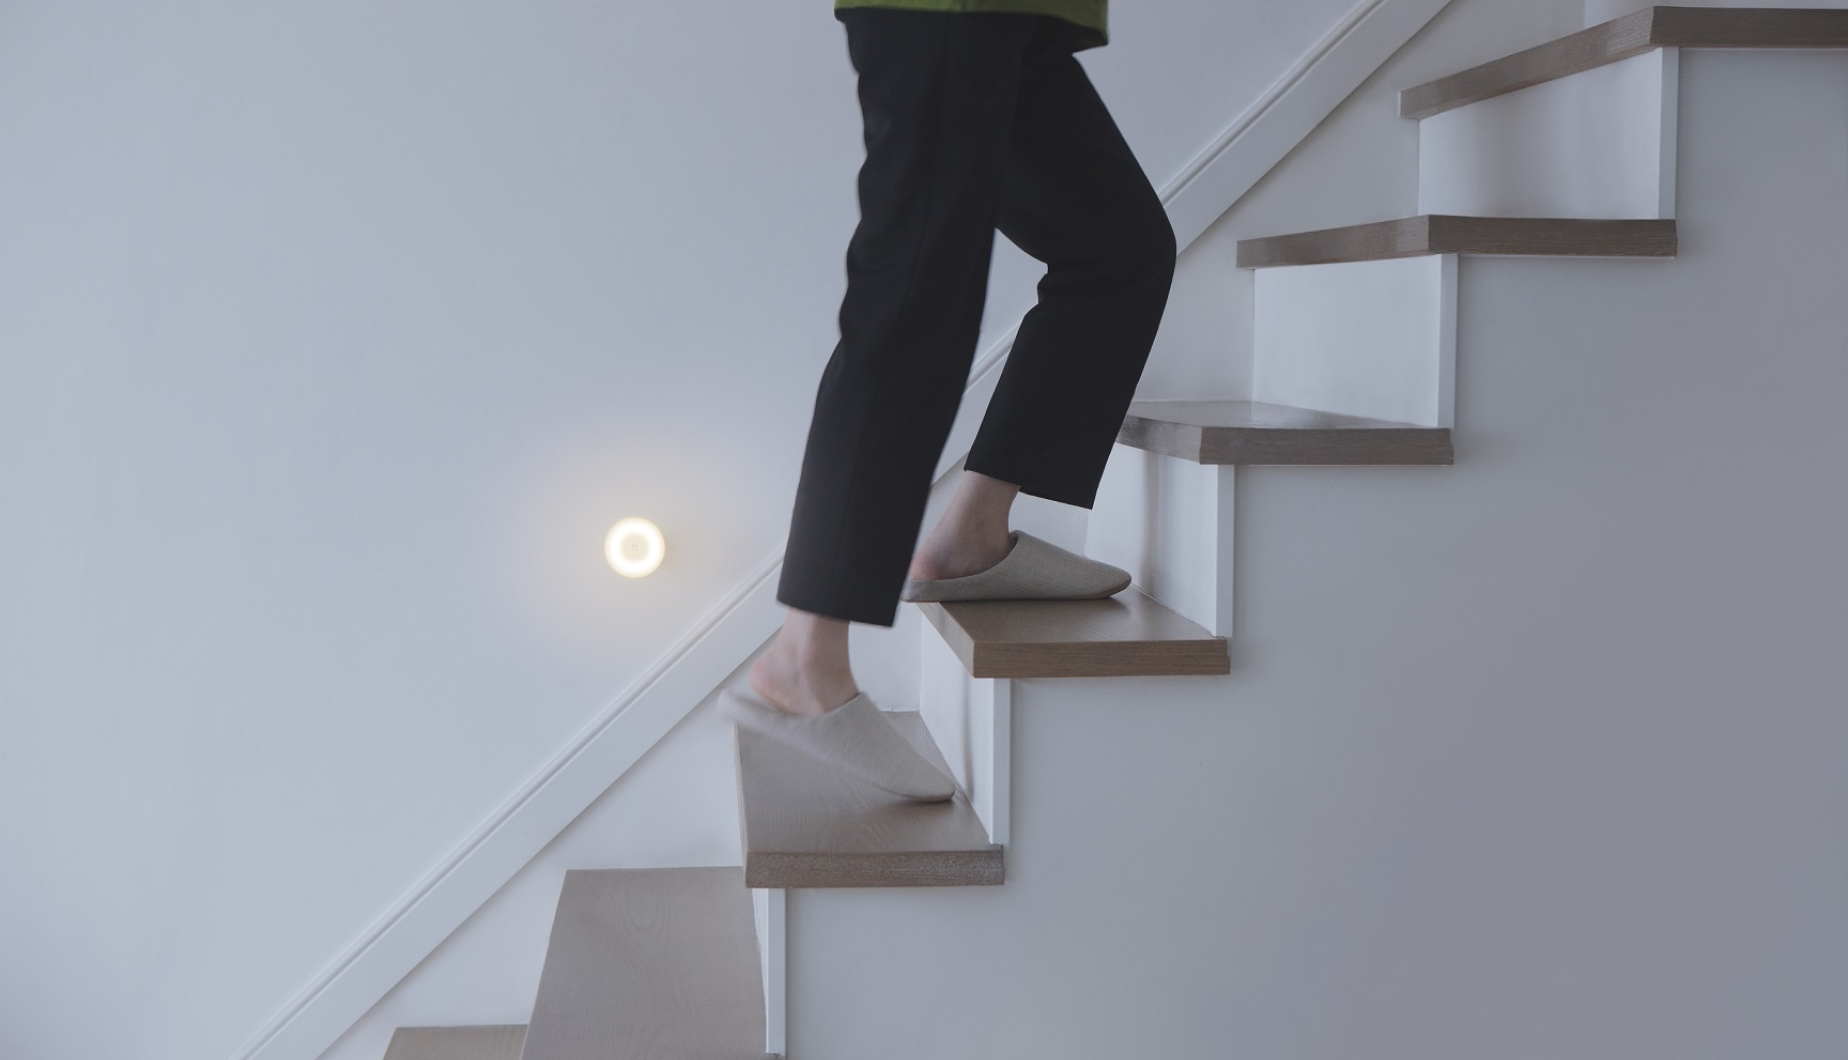 A side view of girl wearing dark pyjamas and fuzzy warm slipper walking up a brown wooden stairs and a light on the wall near the stairs shining